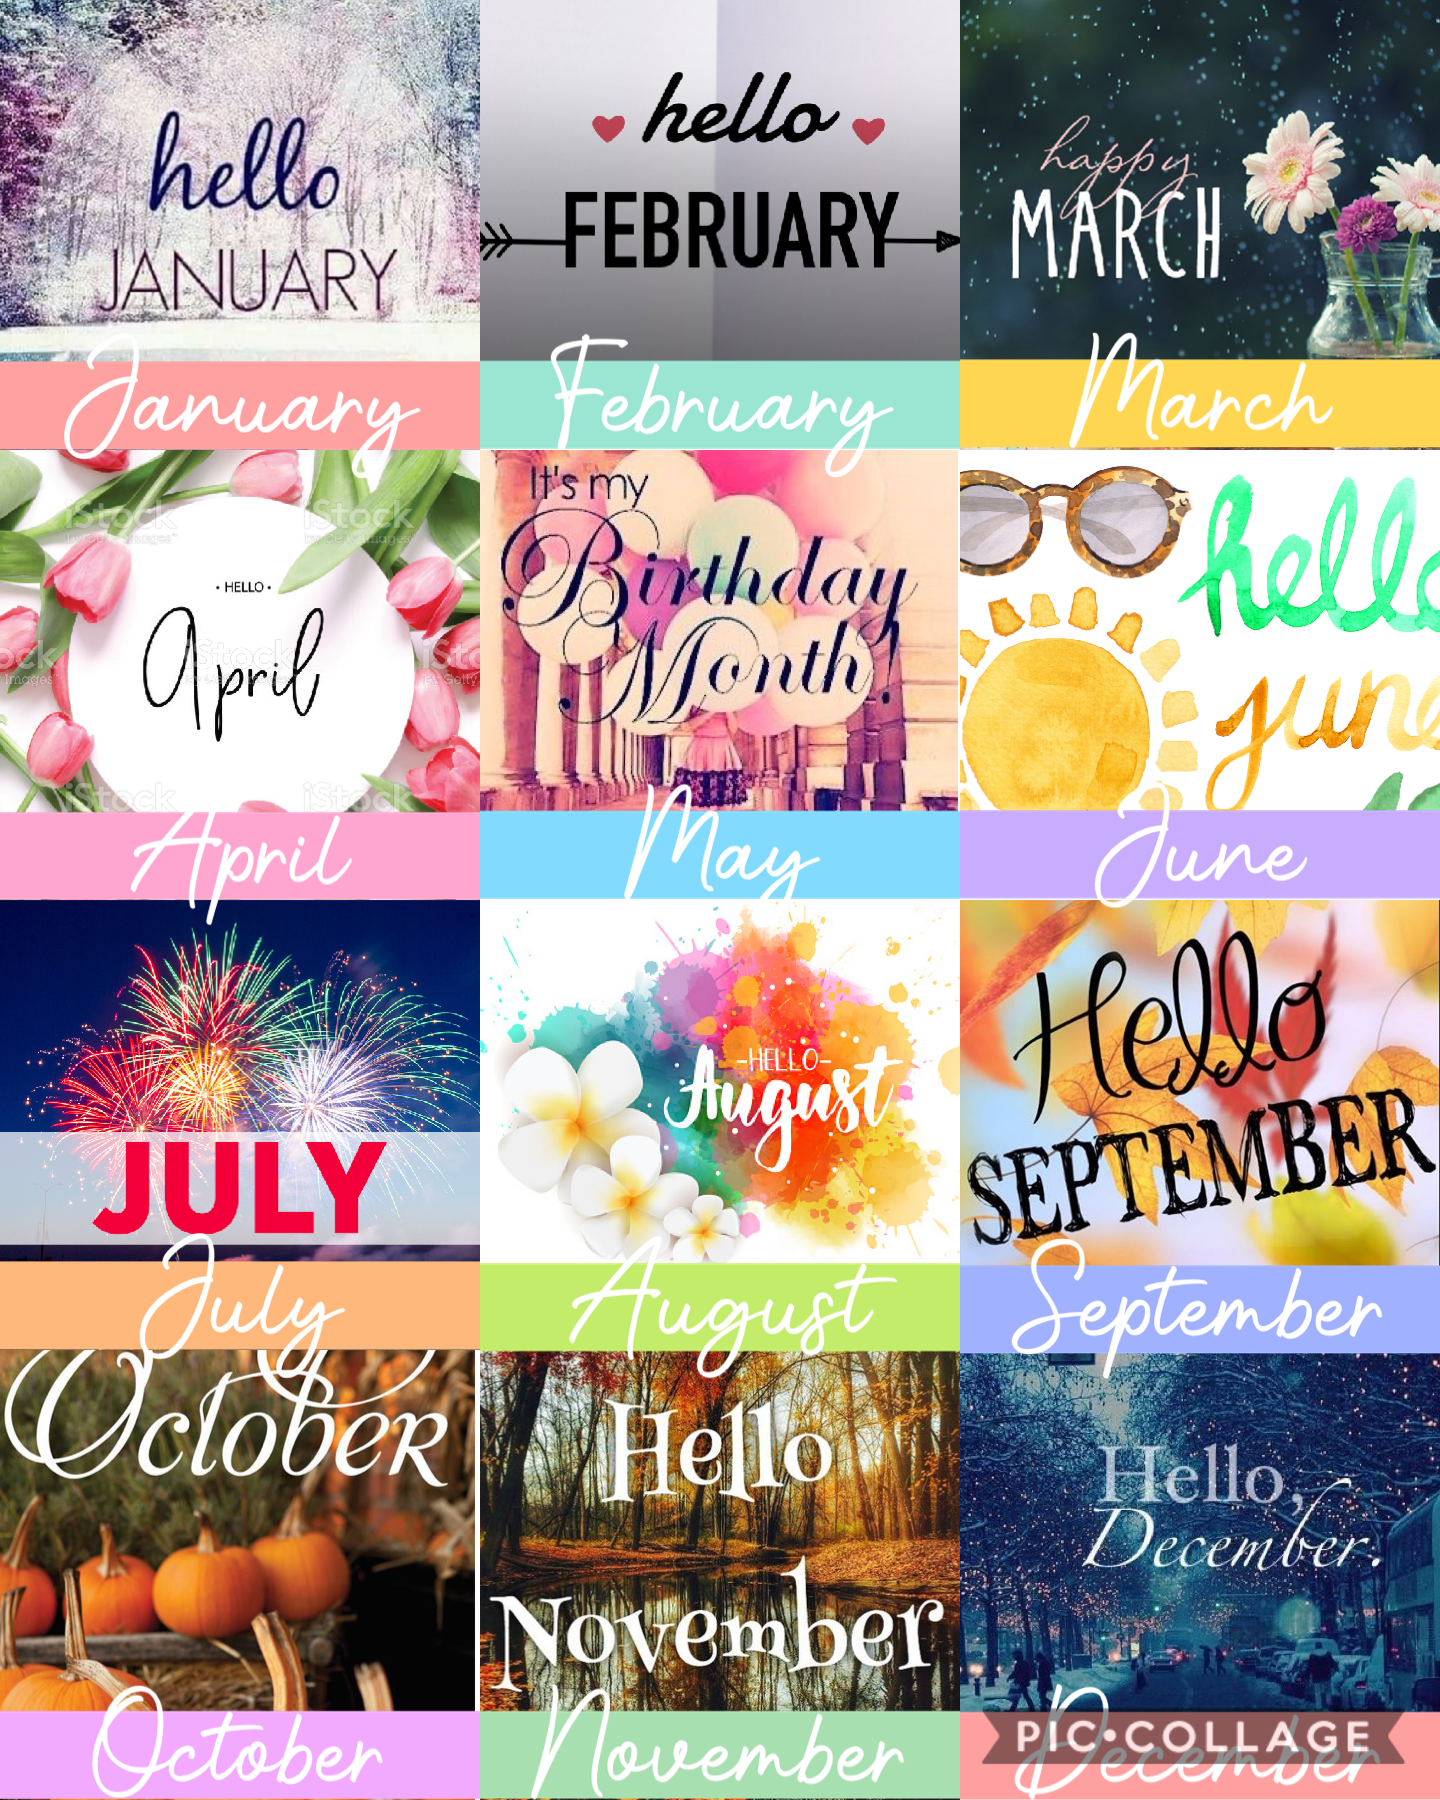 All the months 🎉